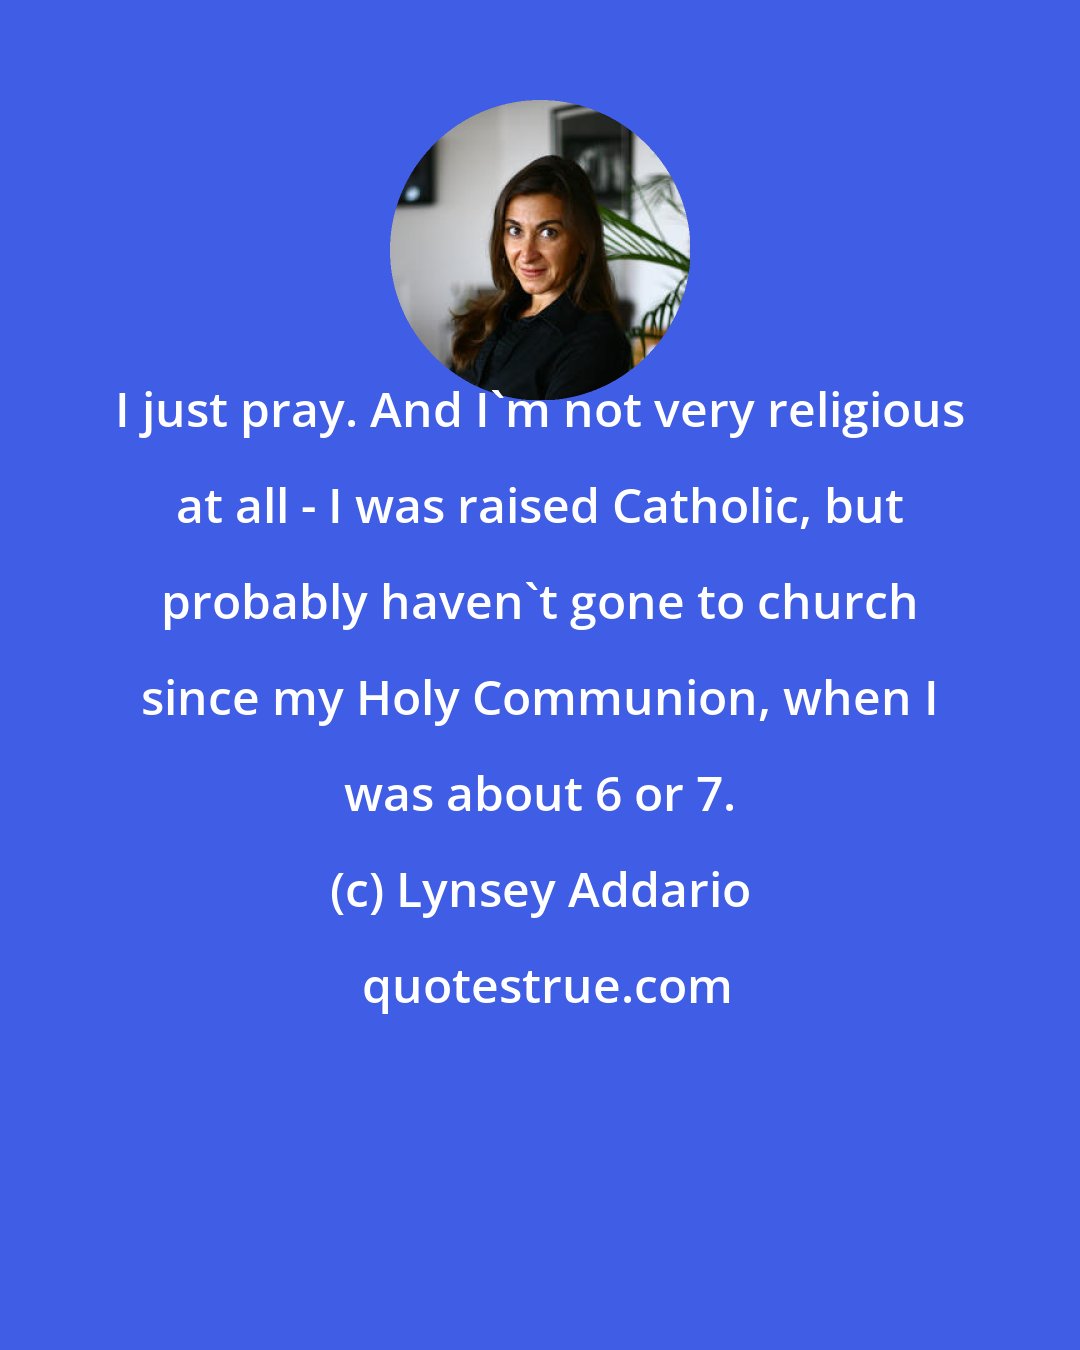 Lynsey Addario: I just pray. And I'm not very religious at all - I was raised Catholic, but probably haven't gone to church since my Holy Communion, when I was about 6 or 7.